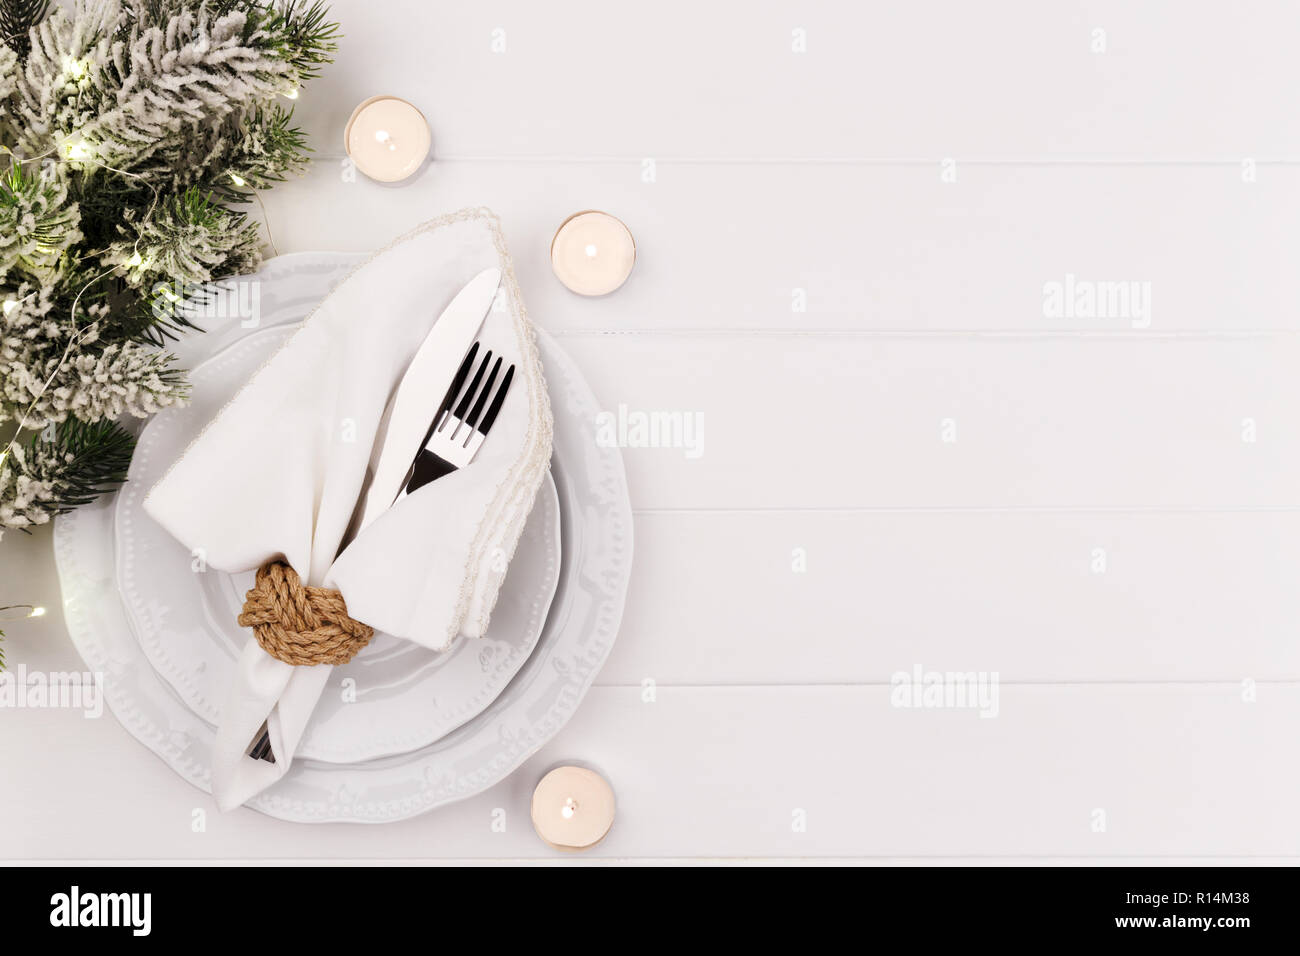 Christmas or new year table setting on white wooden table card or menu ...